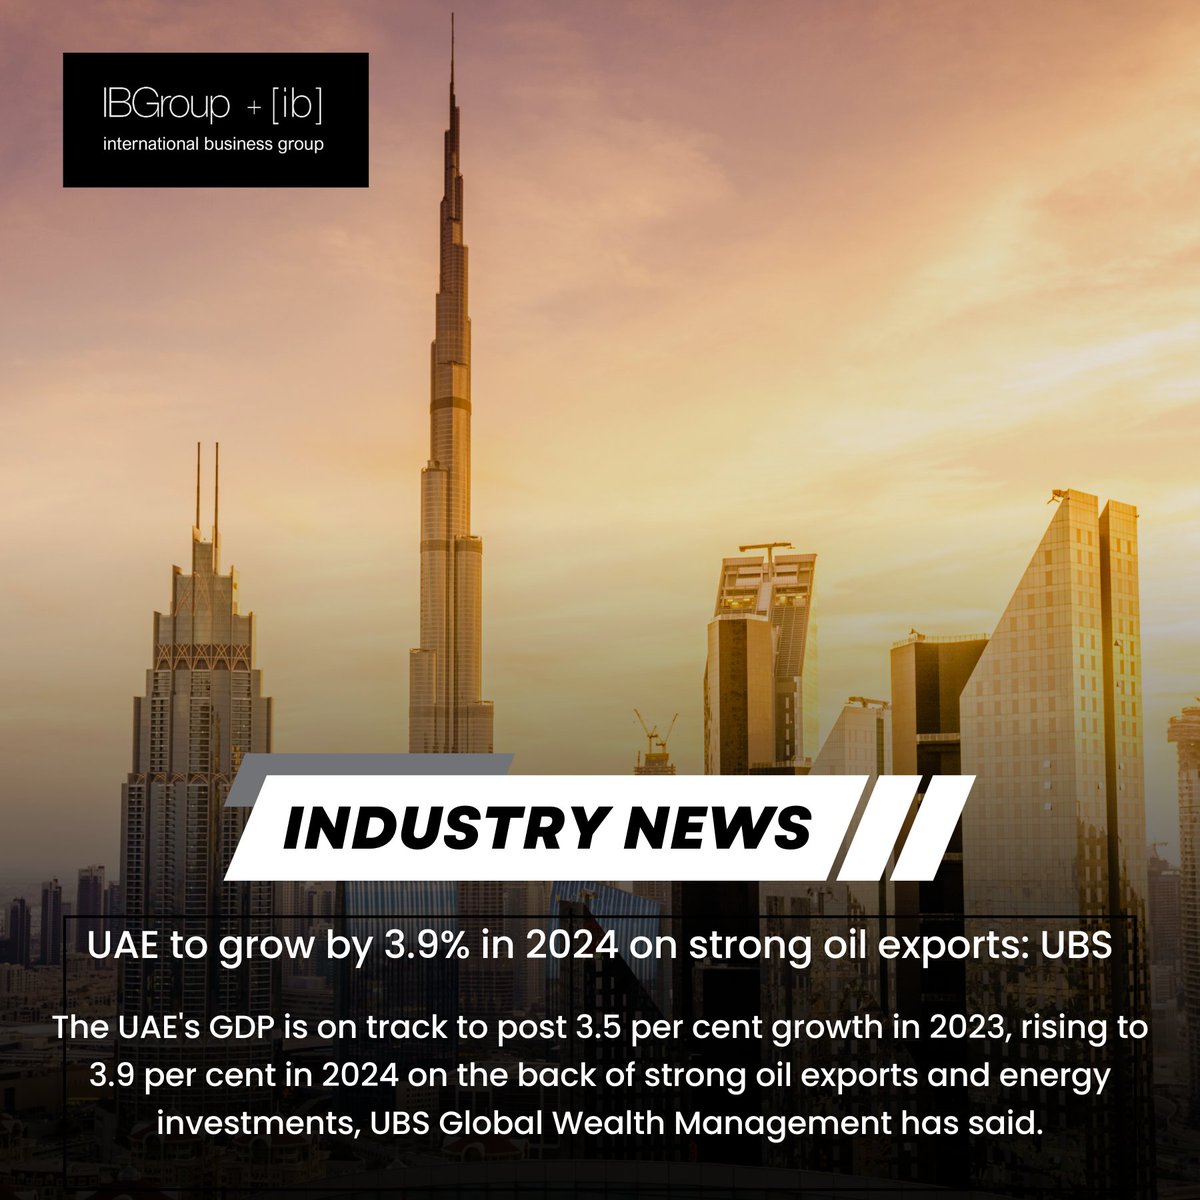 Exciting news for the UAE economy! 📈🌟

According to UBS, the UAE is projected to grow by 3.9% in 2024, driven by robust oil exports. 🛢️Prosperity on the horizon!

#uaeeconomy #growthforecast #ubsinsights #ibgroup #internationalbusiness #globalgrowth